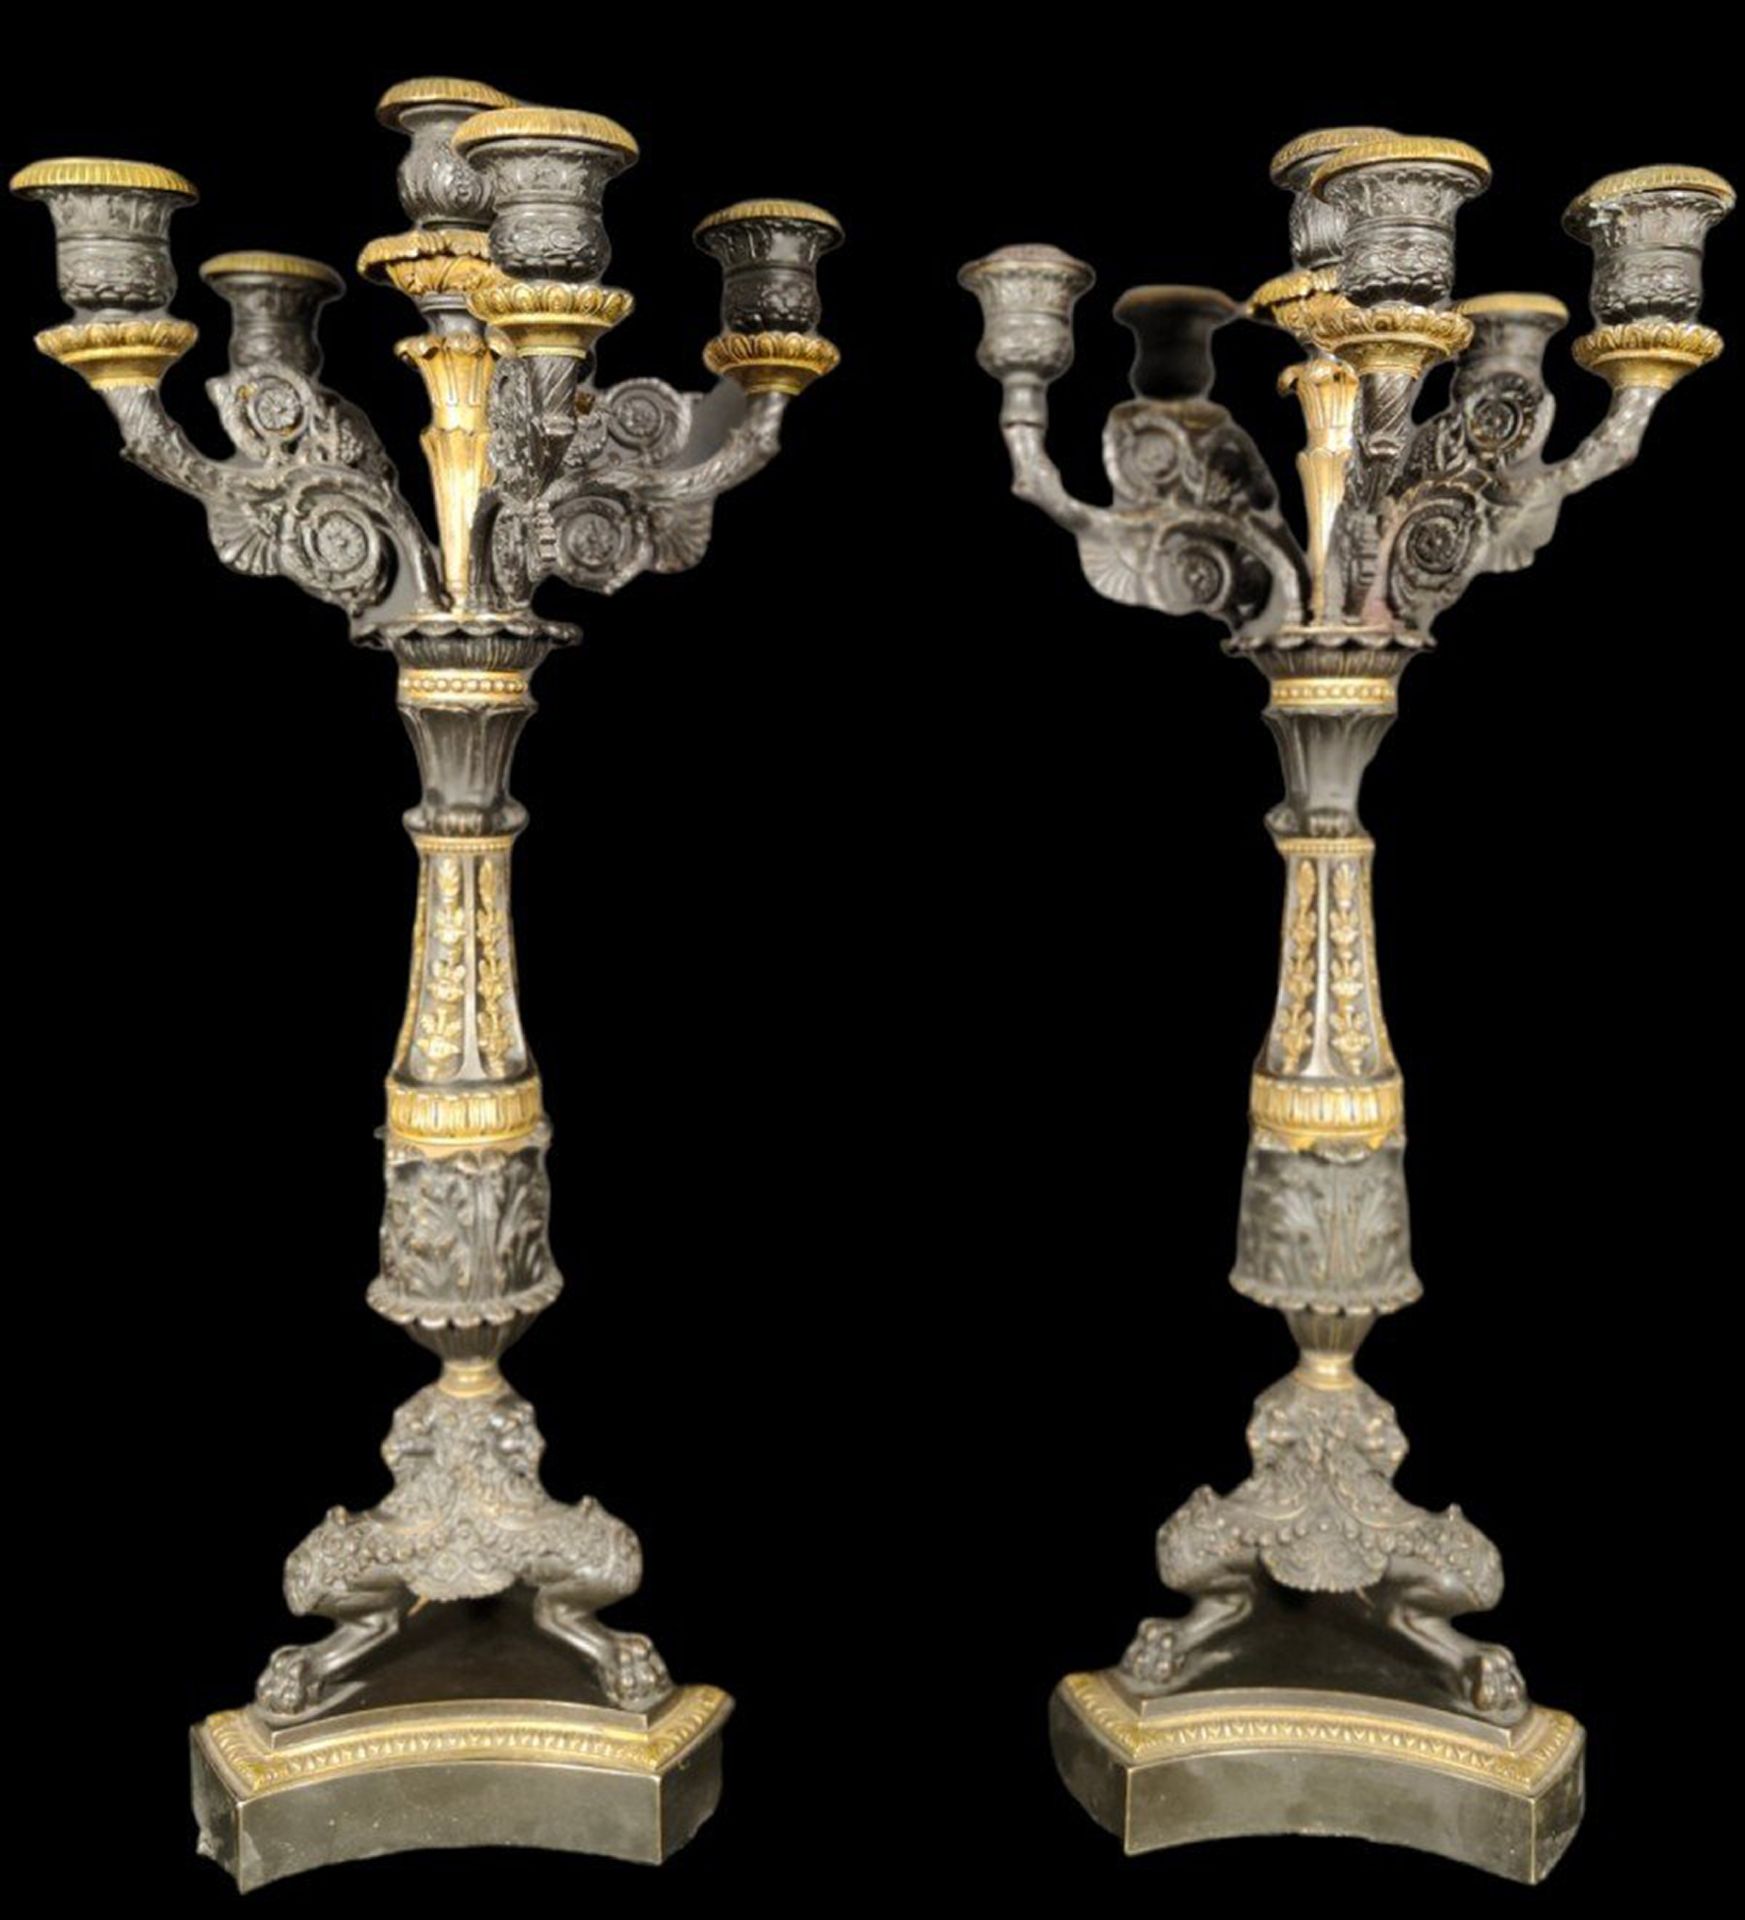 Pair of 19th century French candlesticks in gilt bronze